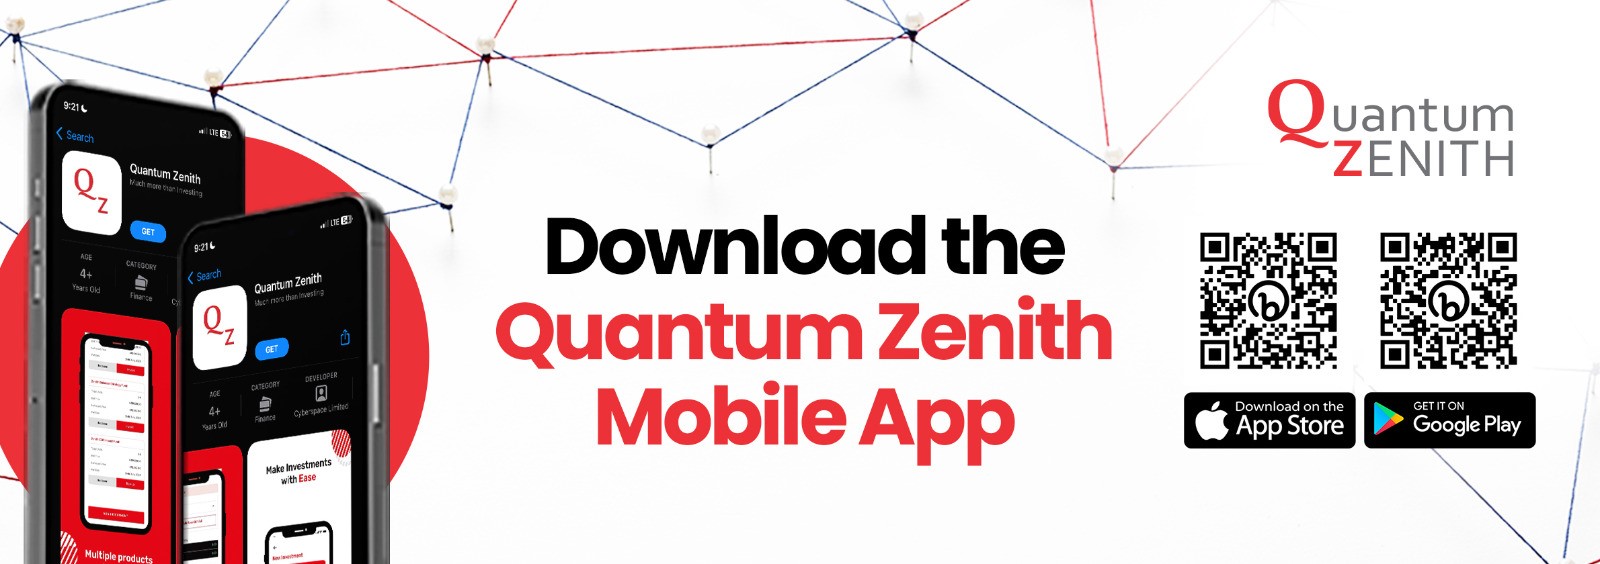 How to delete your data from the Quantum Zenith Mobile App